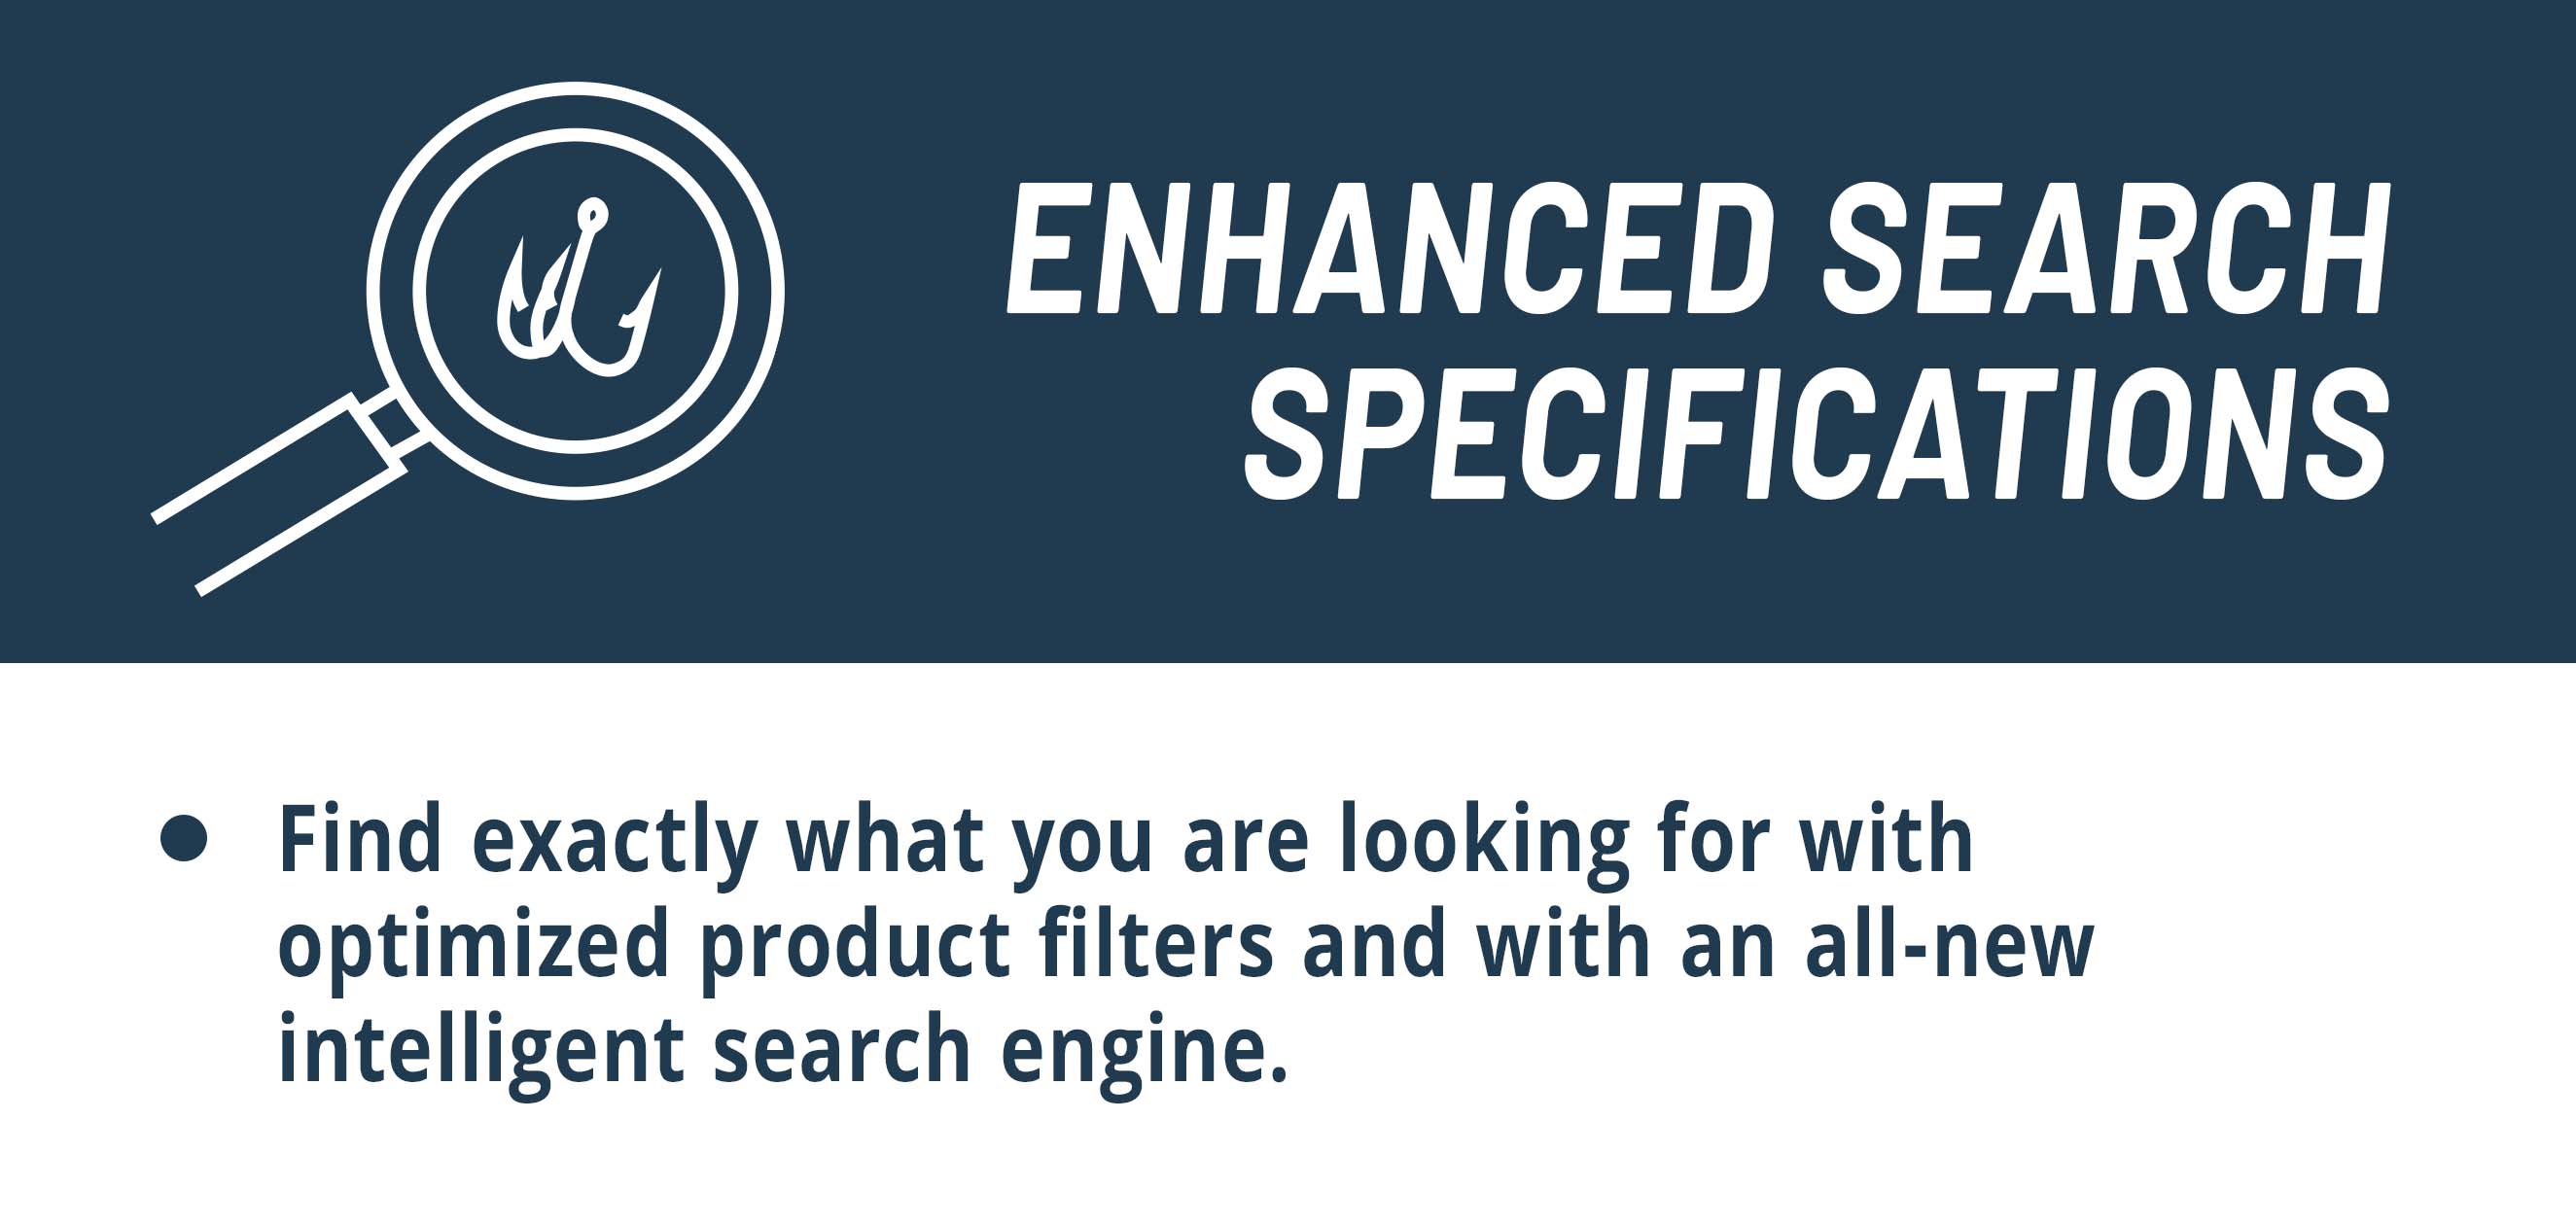  Enhanced Search Specifications  Find exactly what you are looking for with optimized product filters and with an all-new intelligent search engine.